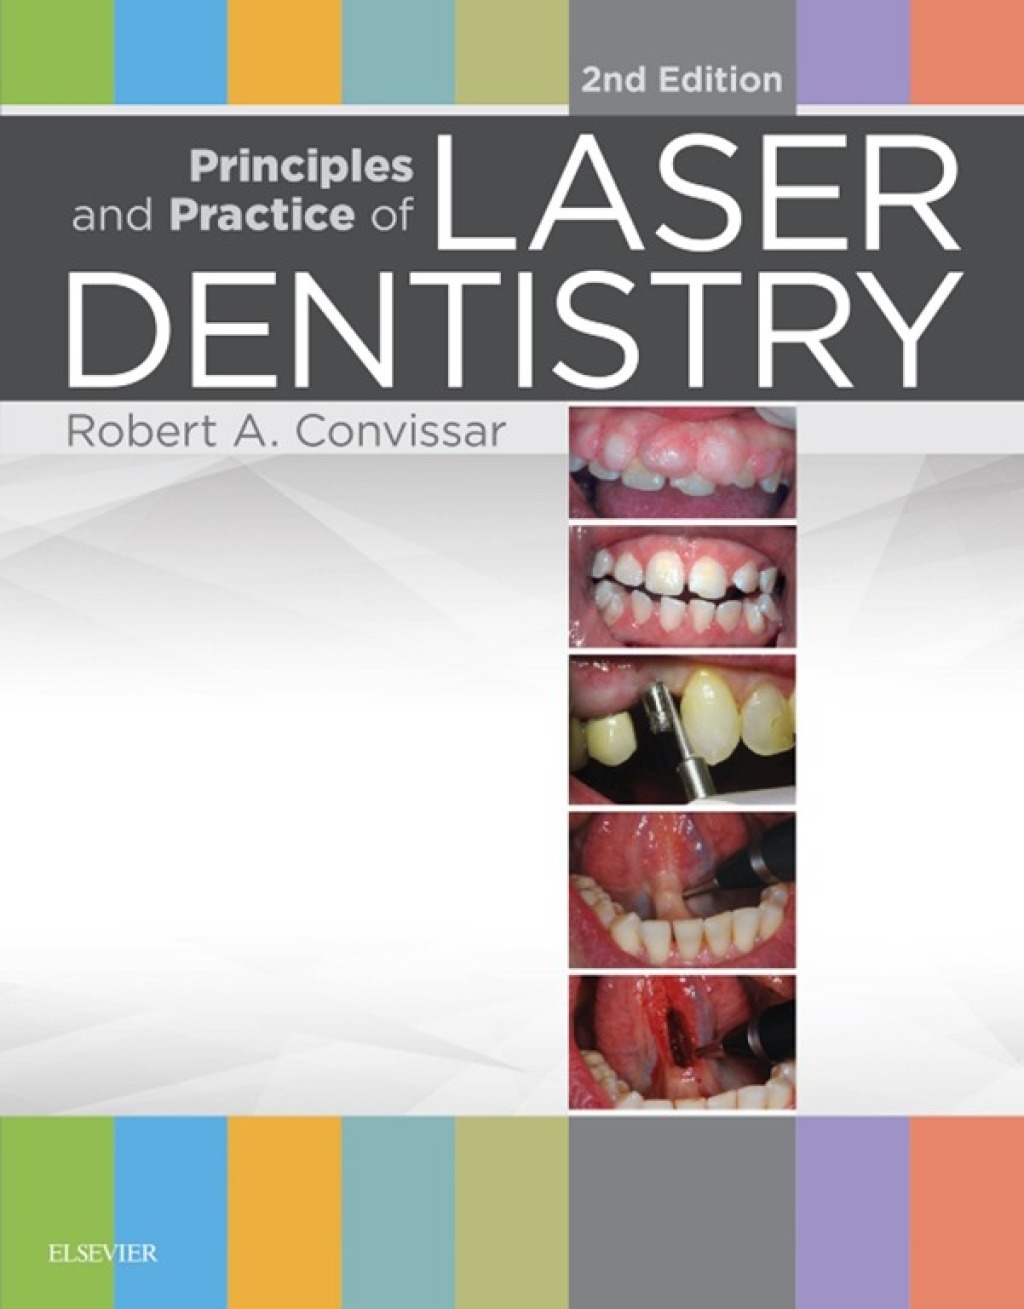 Principles and Practice of Laser Dentistry - 2nd Edition (eBook)